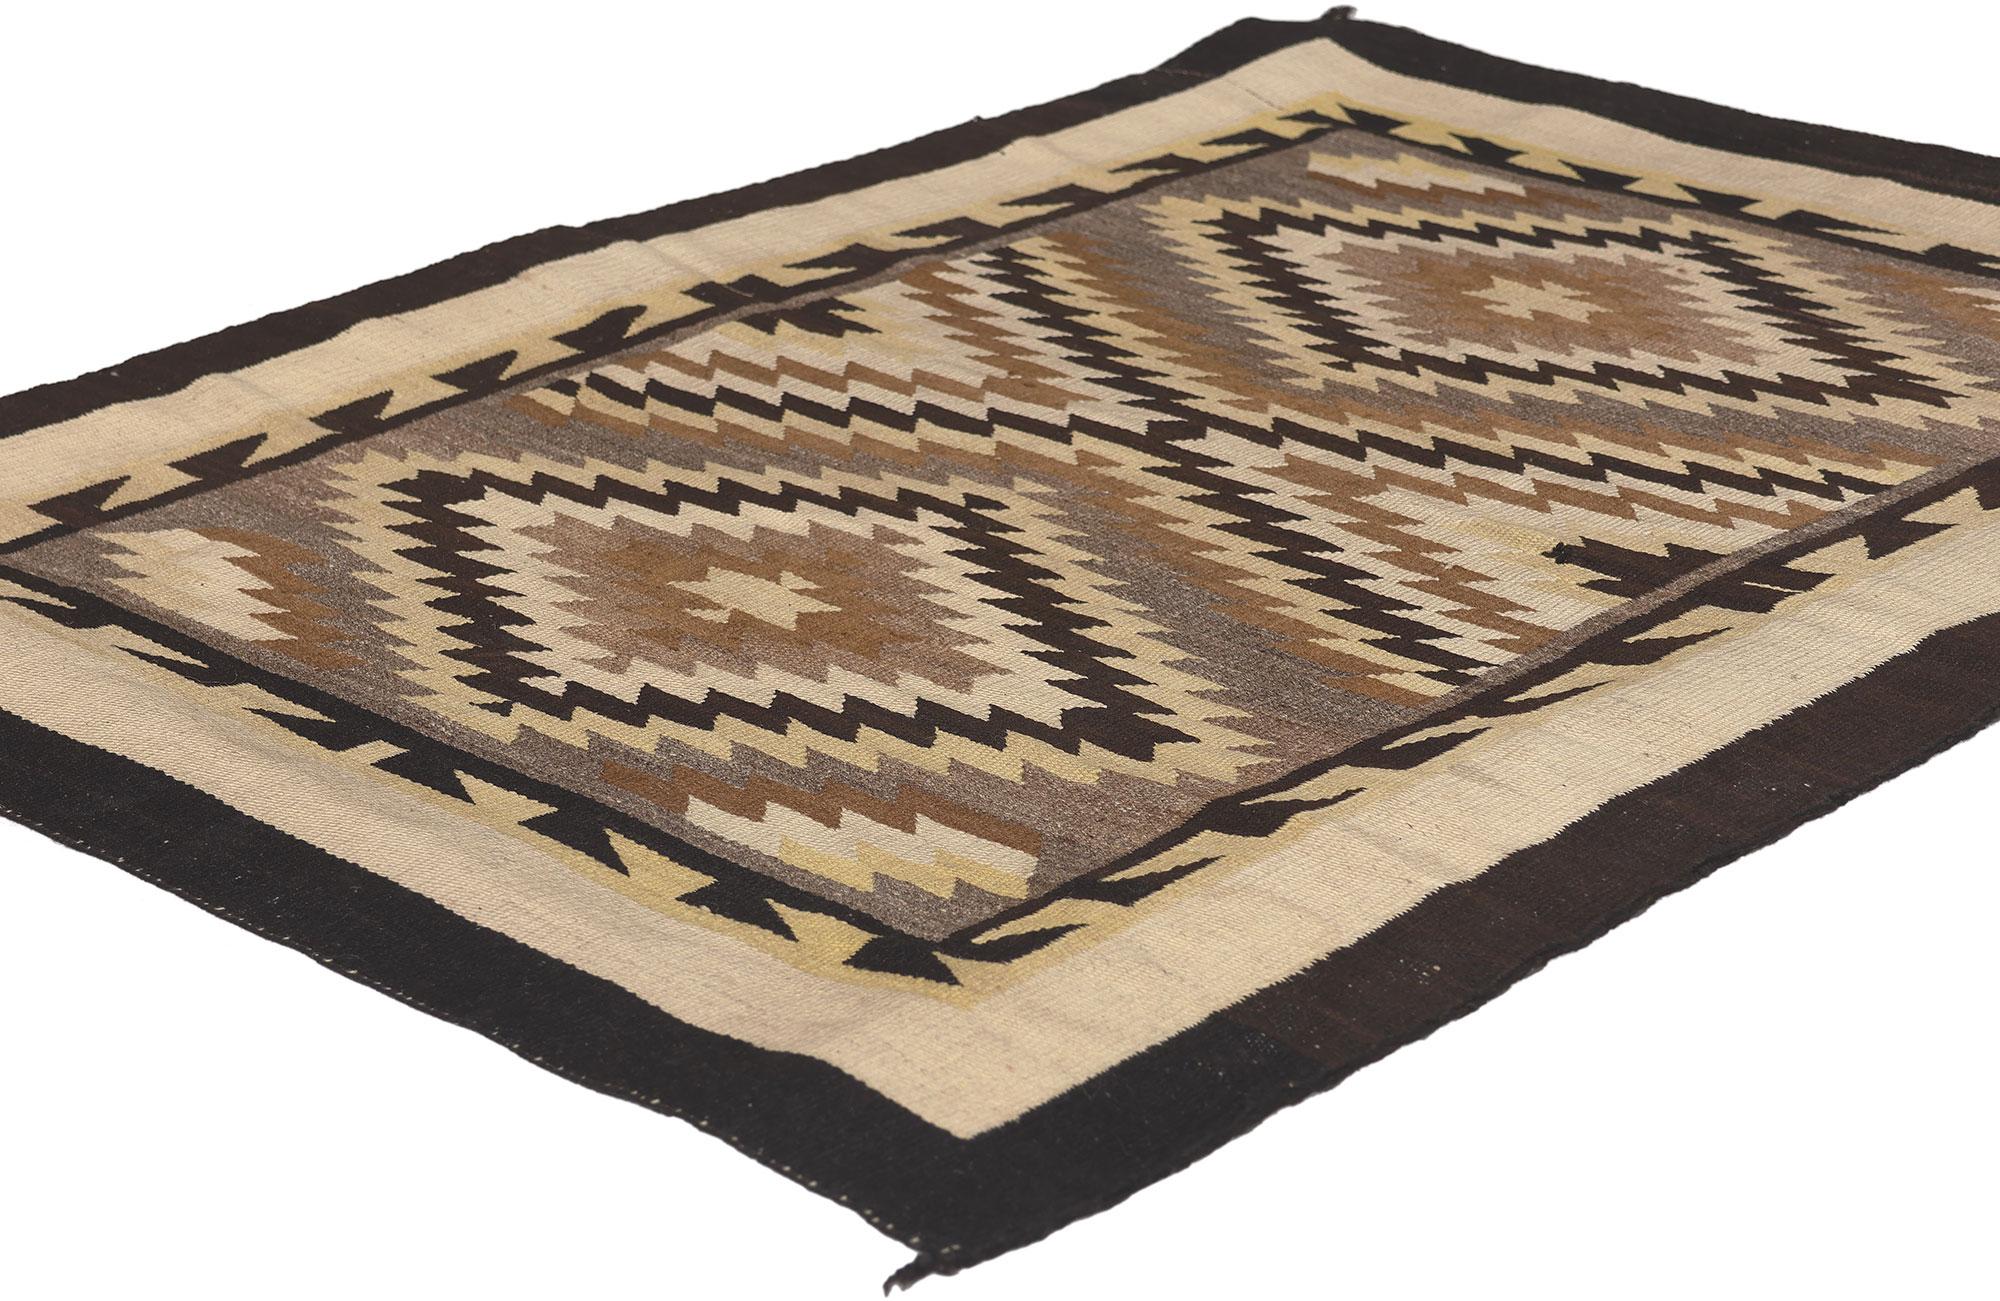 78638 Vintage Two Grey Hills Navajo Rug, 02'06 x 03'05.
Subtle Southwest style meets Organic Modern in this handwoven Two Grey Hills rug. The eye-catching diamond pattern and neutral earthy colorway woven into this piece work together to evoke a